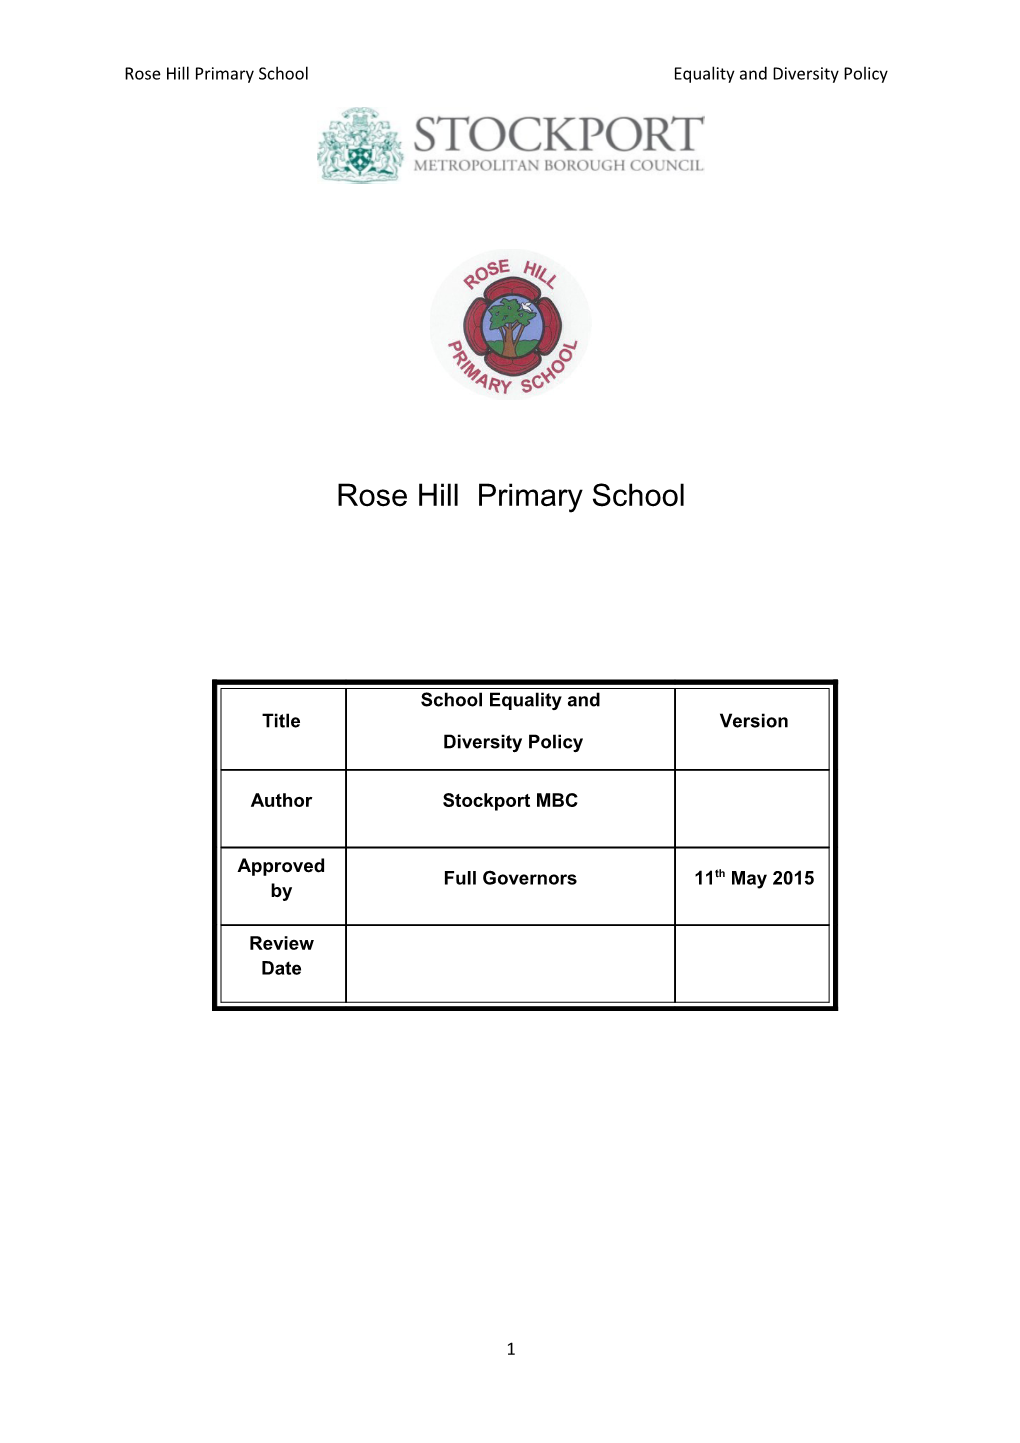 Rose Hill Primary School Equality and Diversity Policy